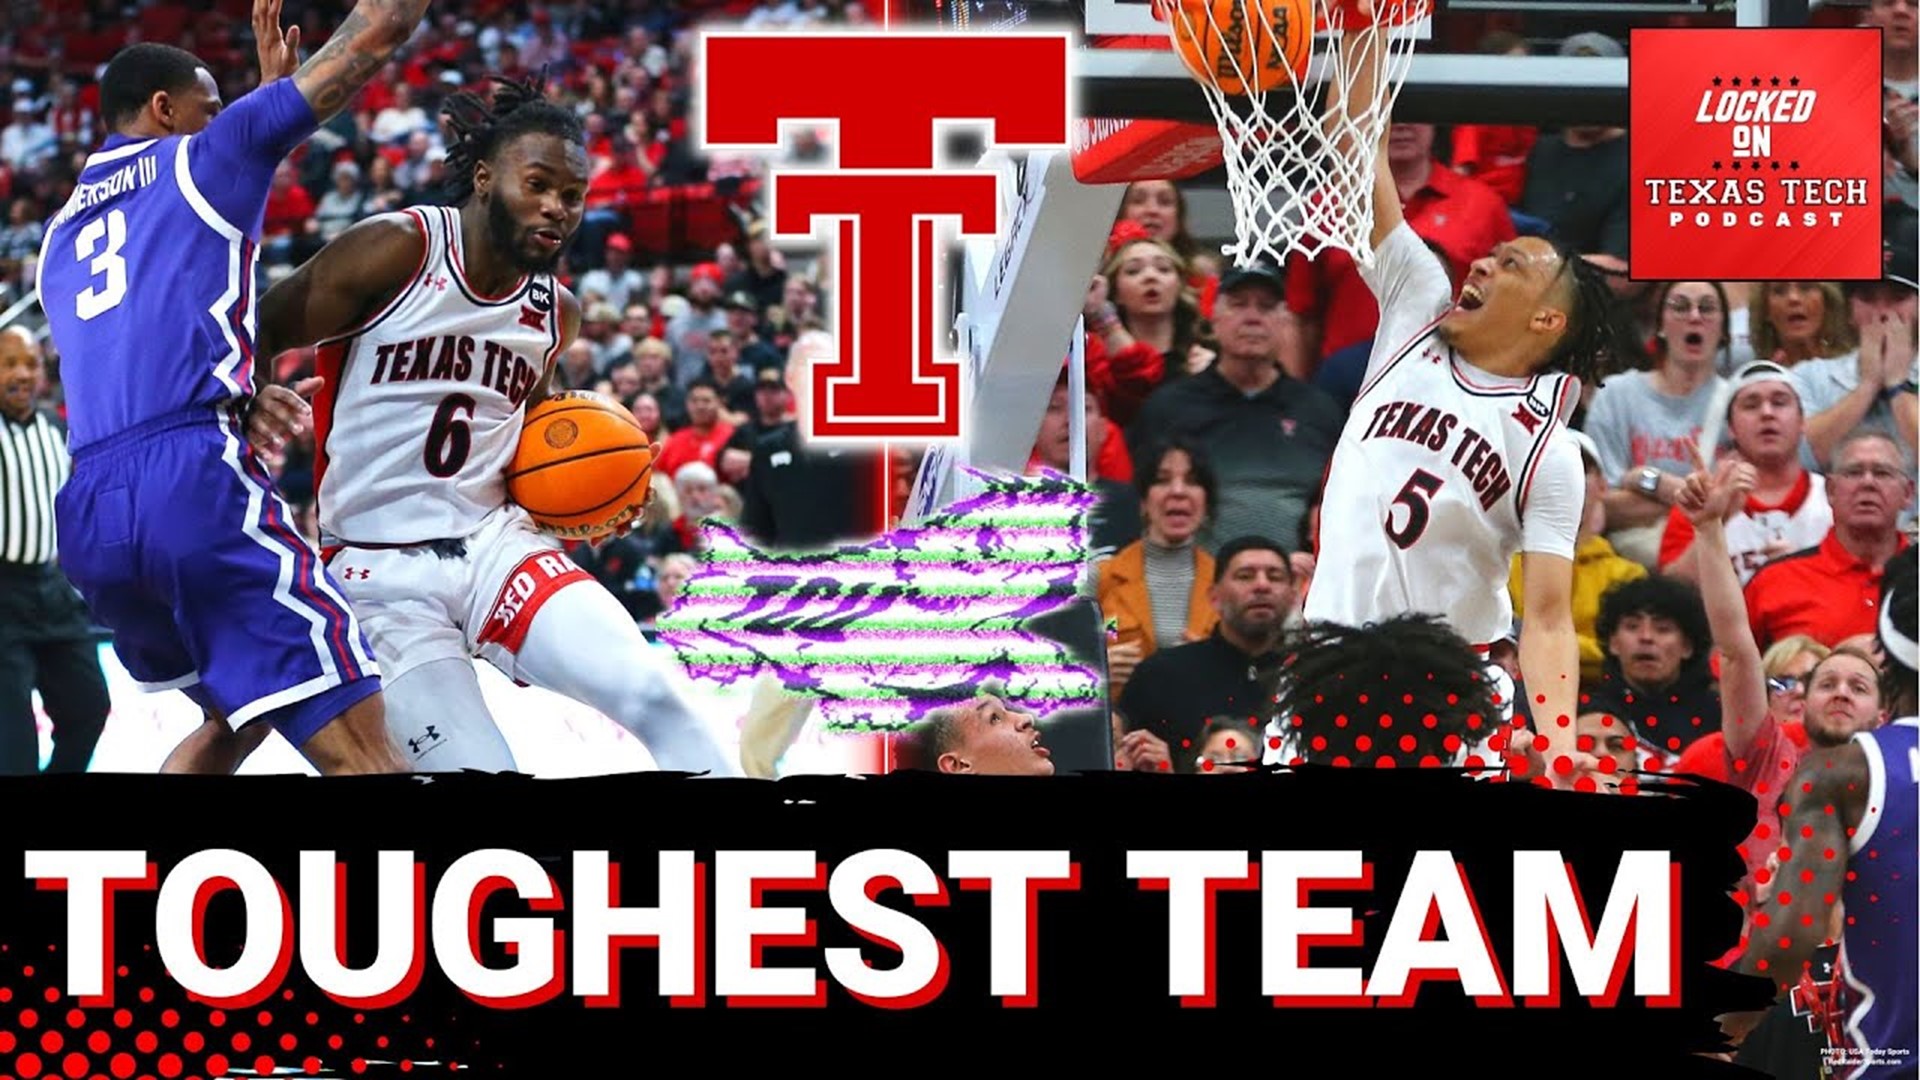 Today from Lubbock, TX, on Locked On Texas Tech:

- Tech 82, TCU 81
- down 10 w/ 6:55 left
- toughest team wins